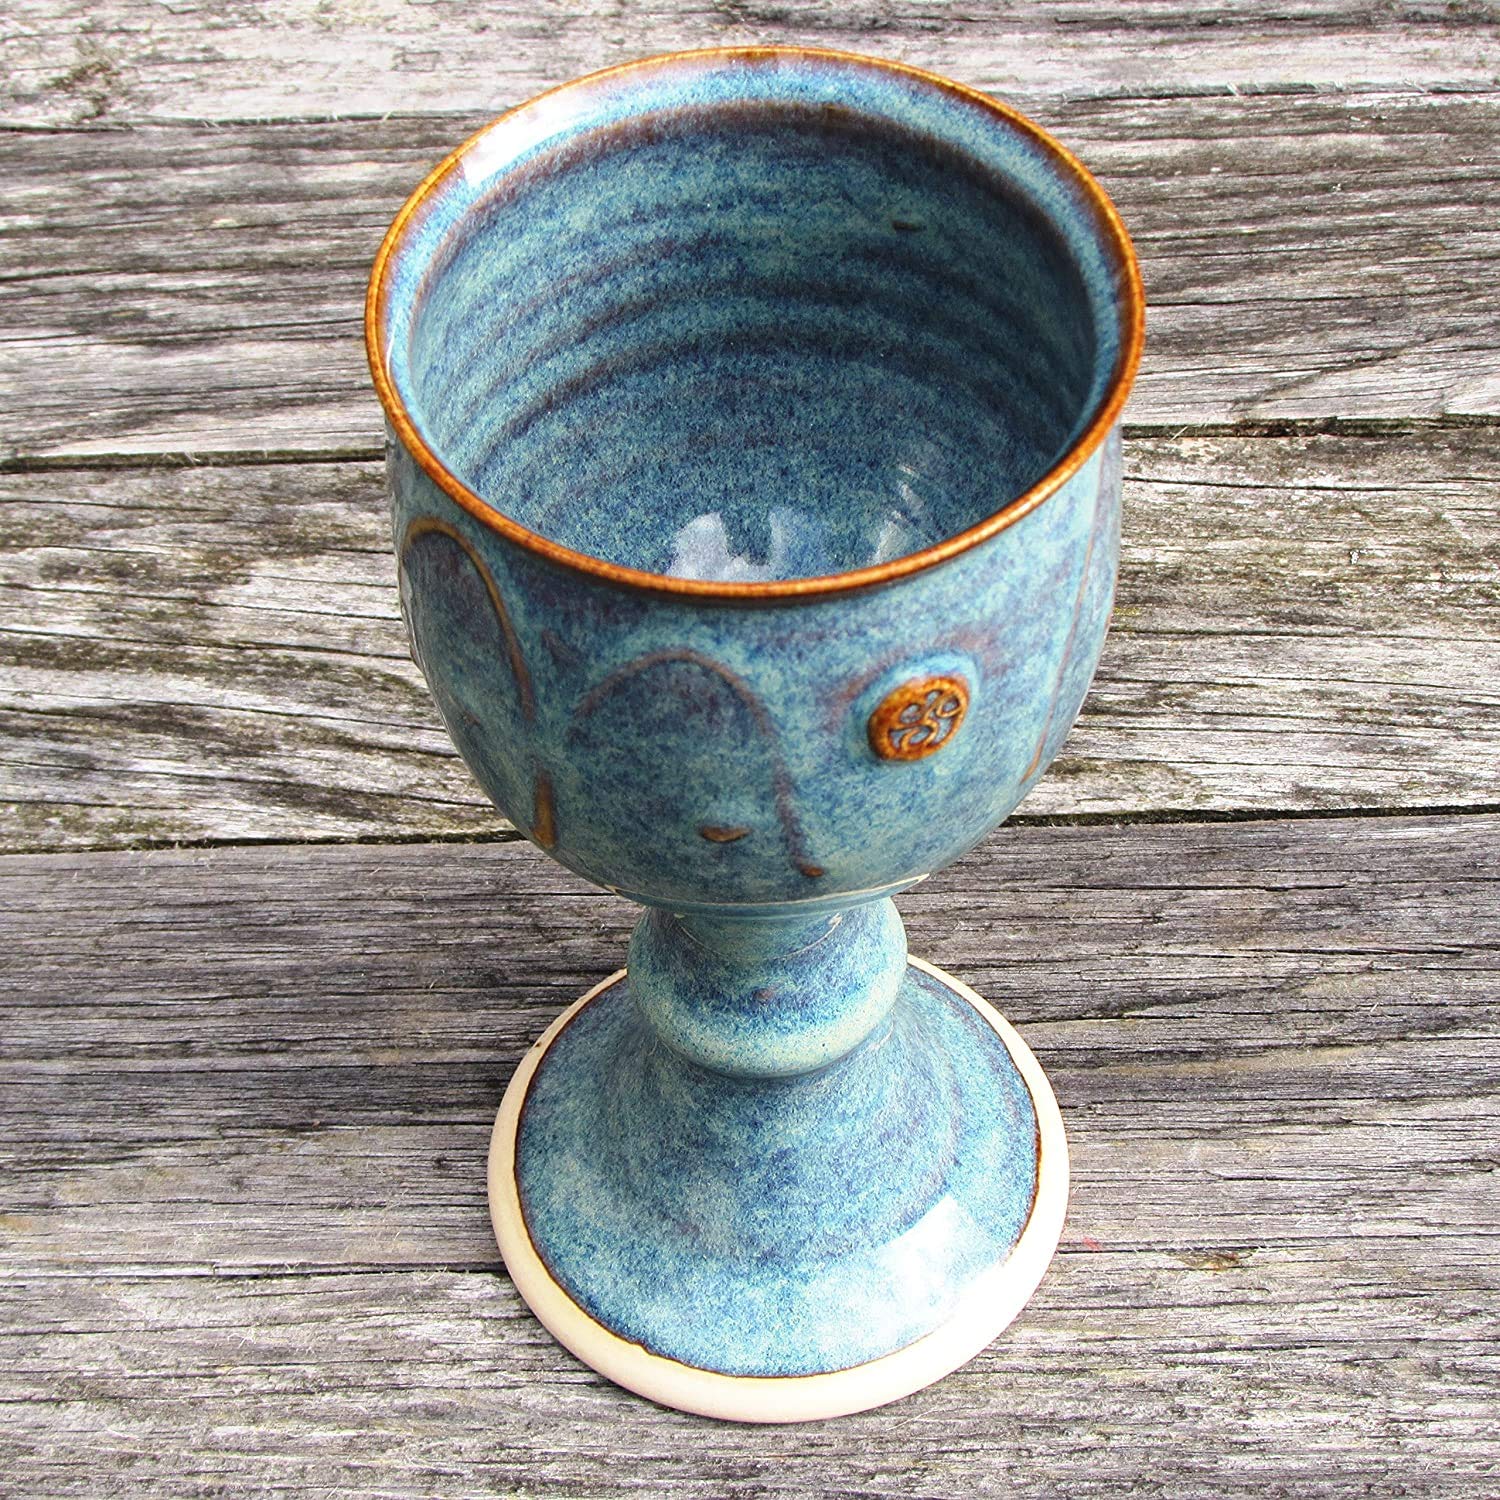 Castle Arch Pottery Ireland Handmade Wine Goblet Hand-Thrown Hand-Glazed with Unique Celtic Stamp in Ireland , 7